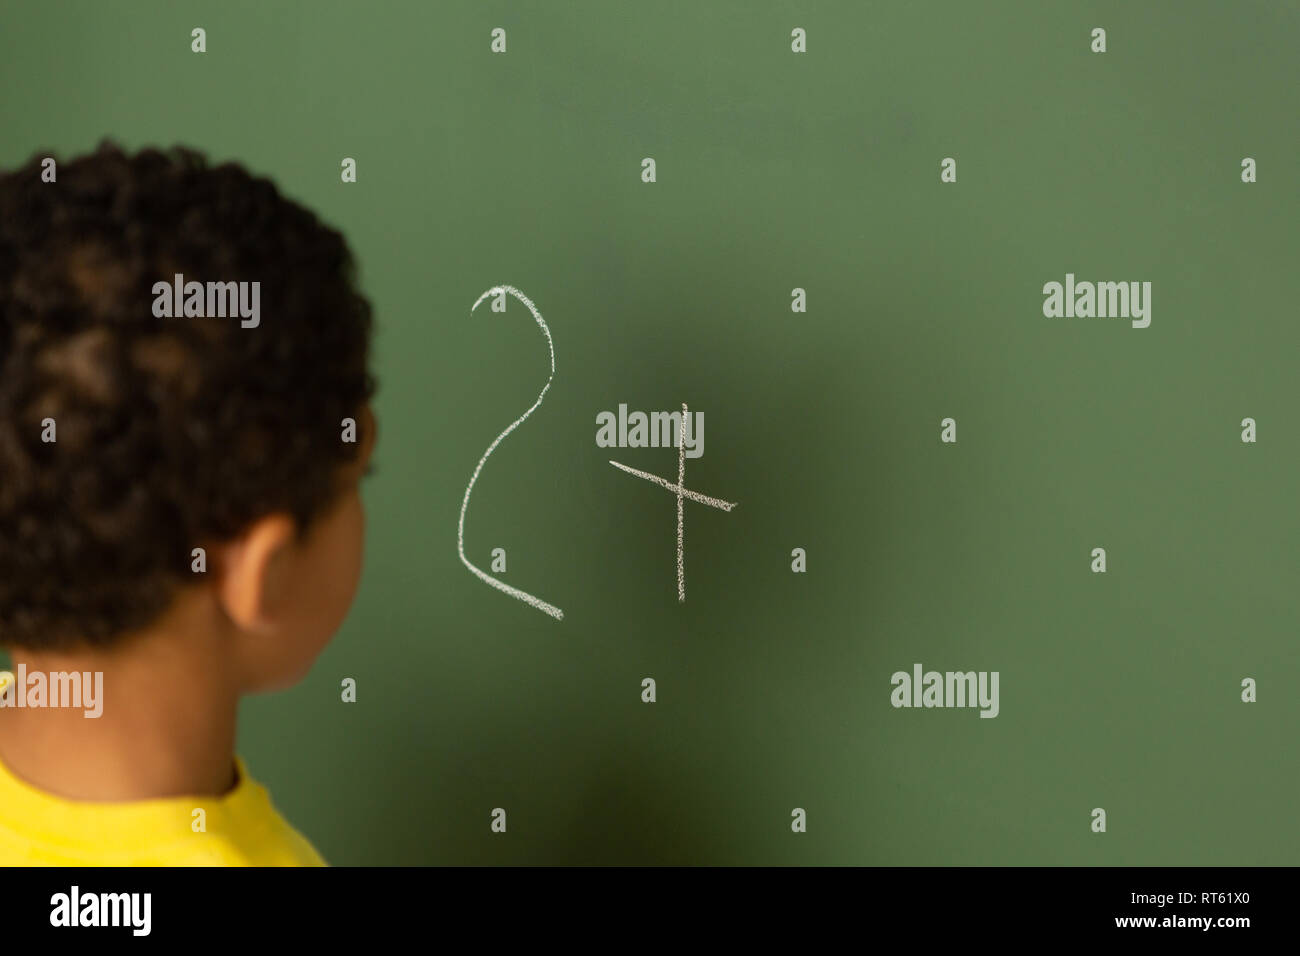 Schoolboy doing math on greenboard in a classroom Stock Photo